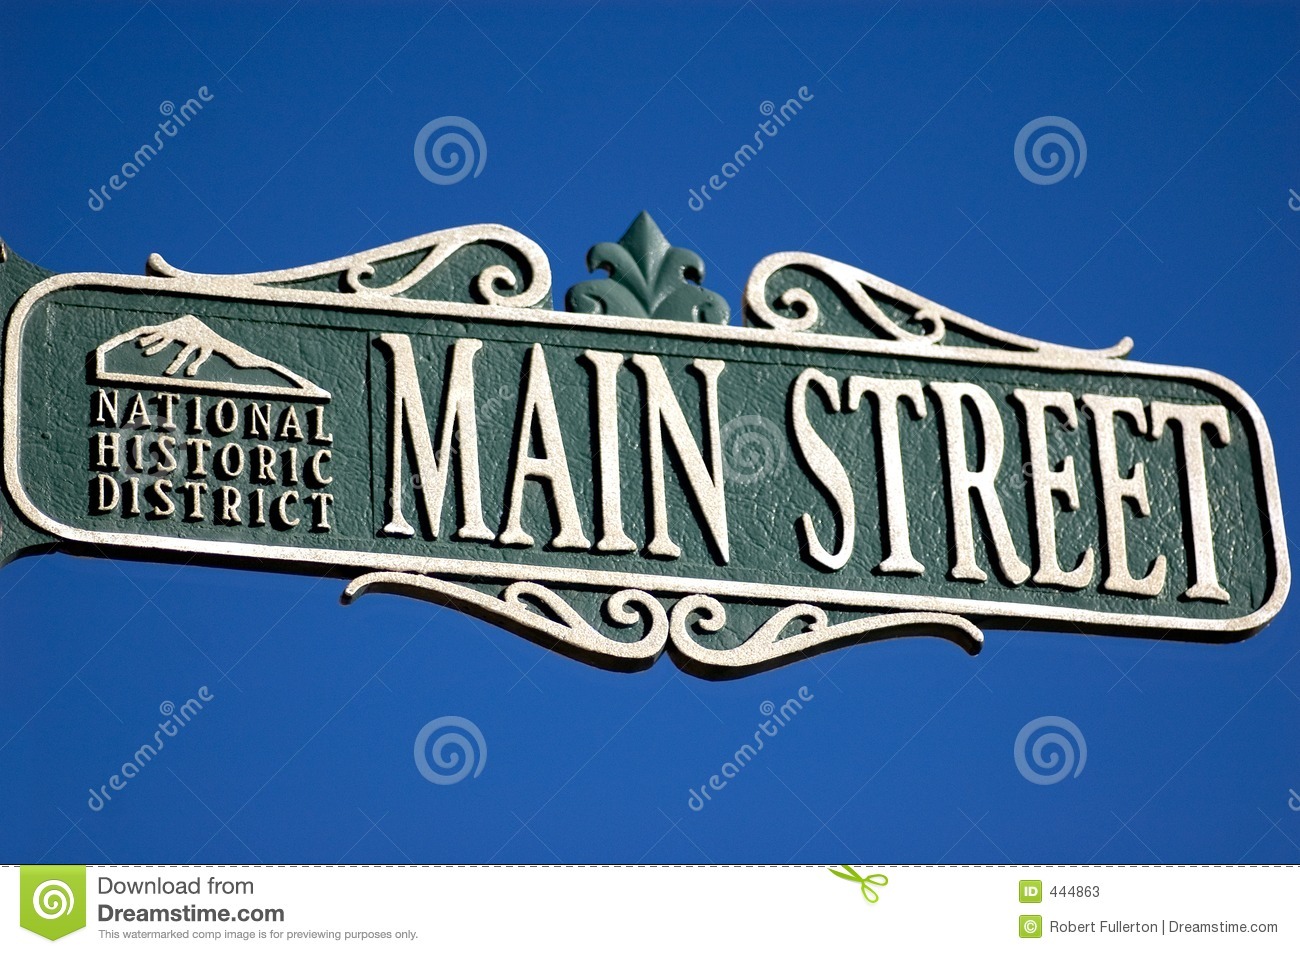 Detail Of Decorative Street Sign Main Street National Hisoric District